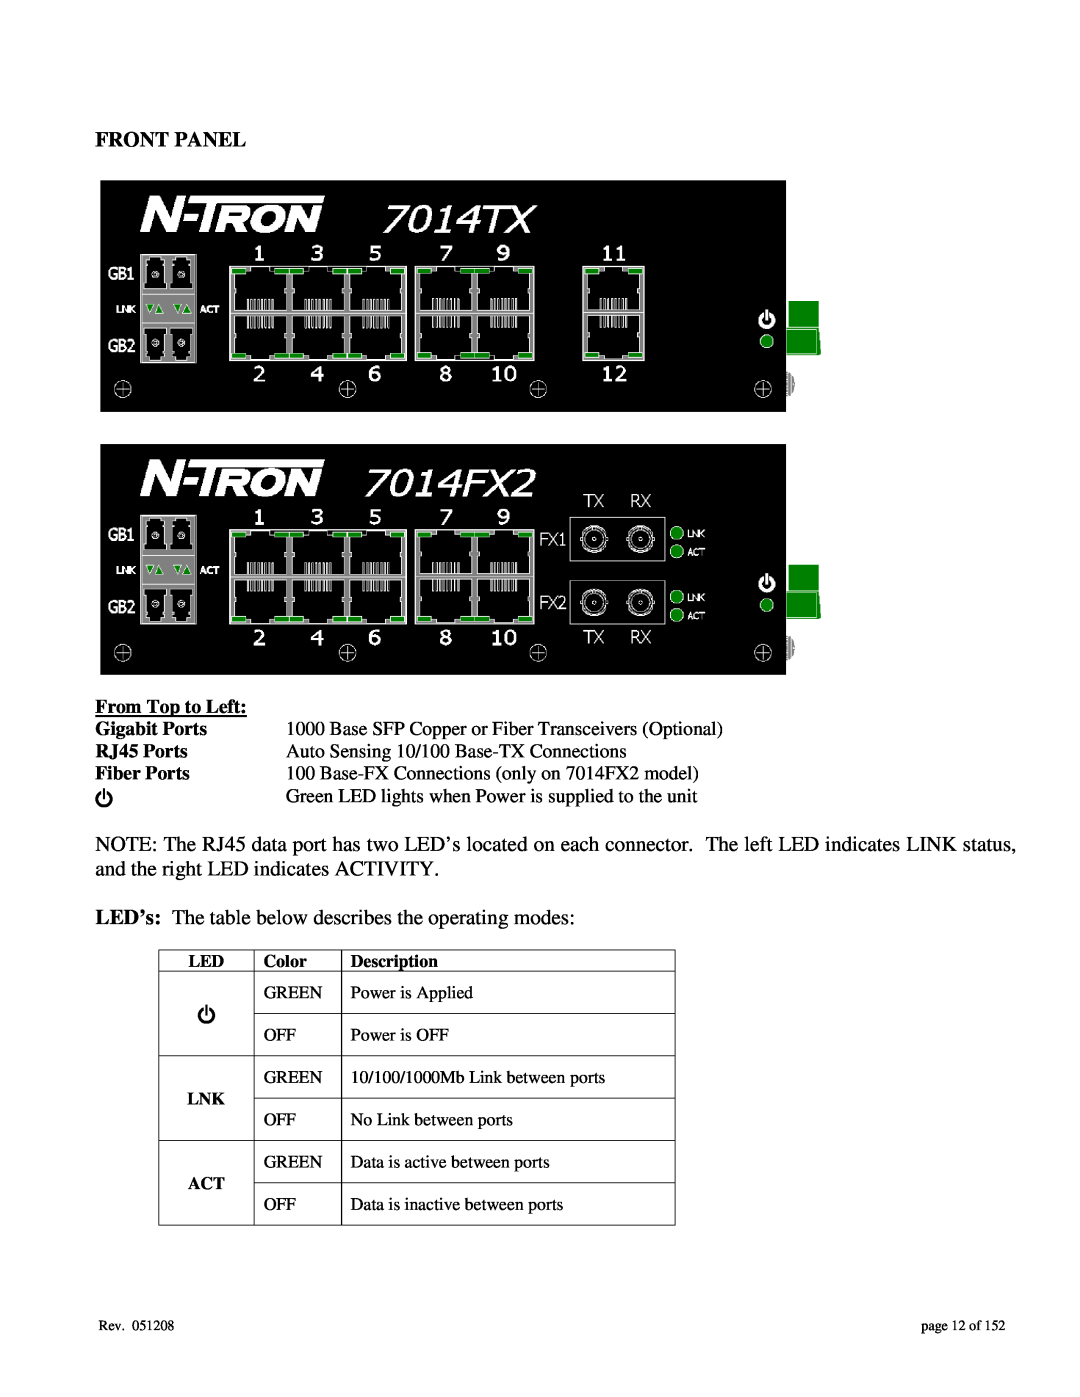 Gigabyte 7014 user manual Front Panel, LED’s The table below describes the operating modes, From Top to Left 